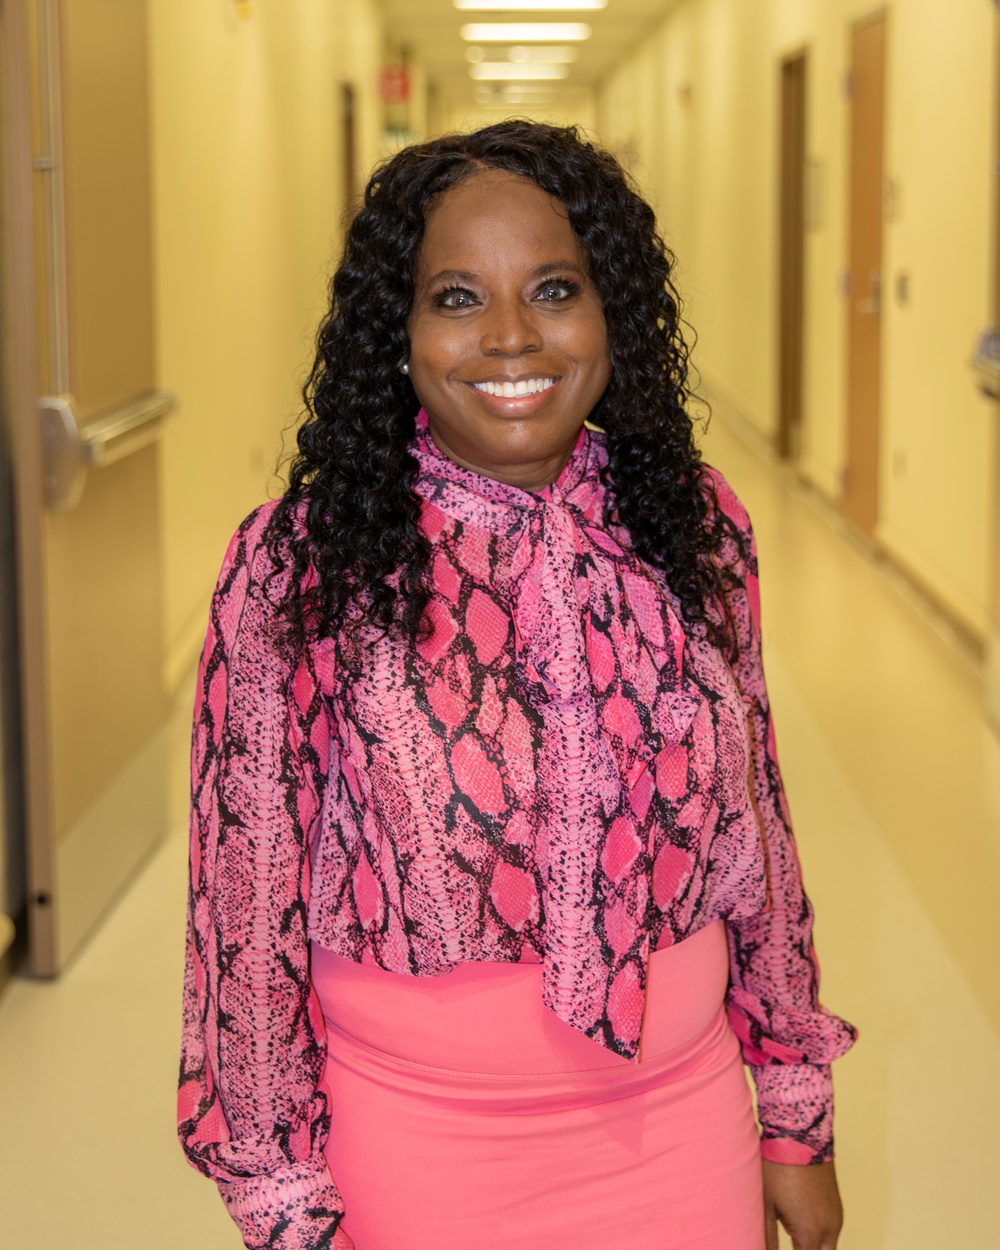 Mammograms: Prevention with a Smile